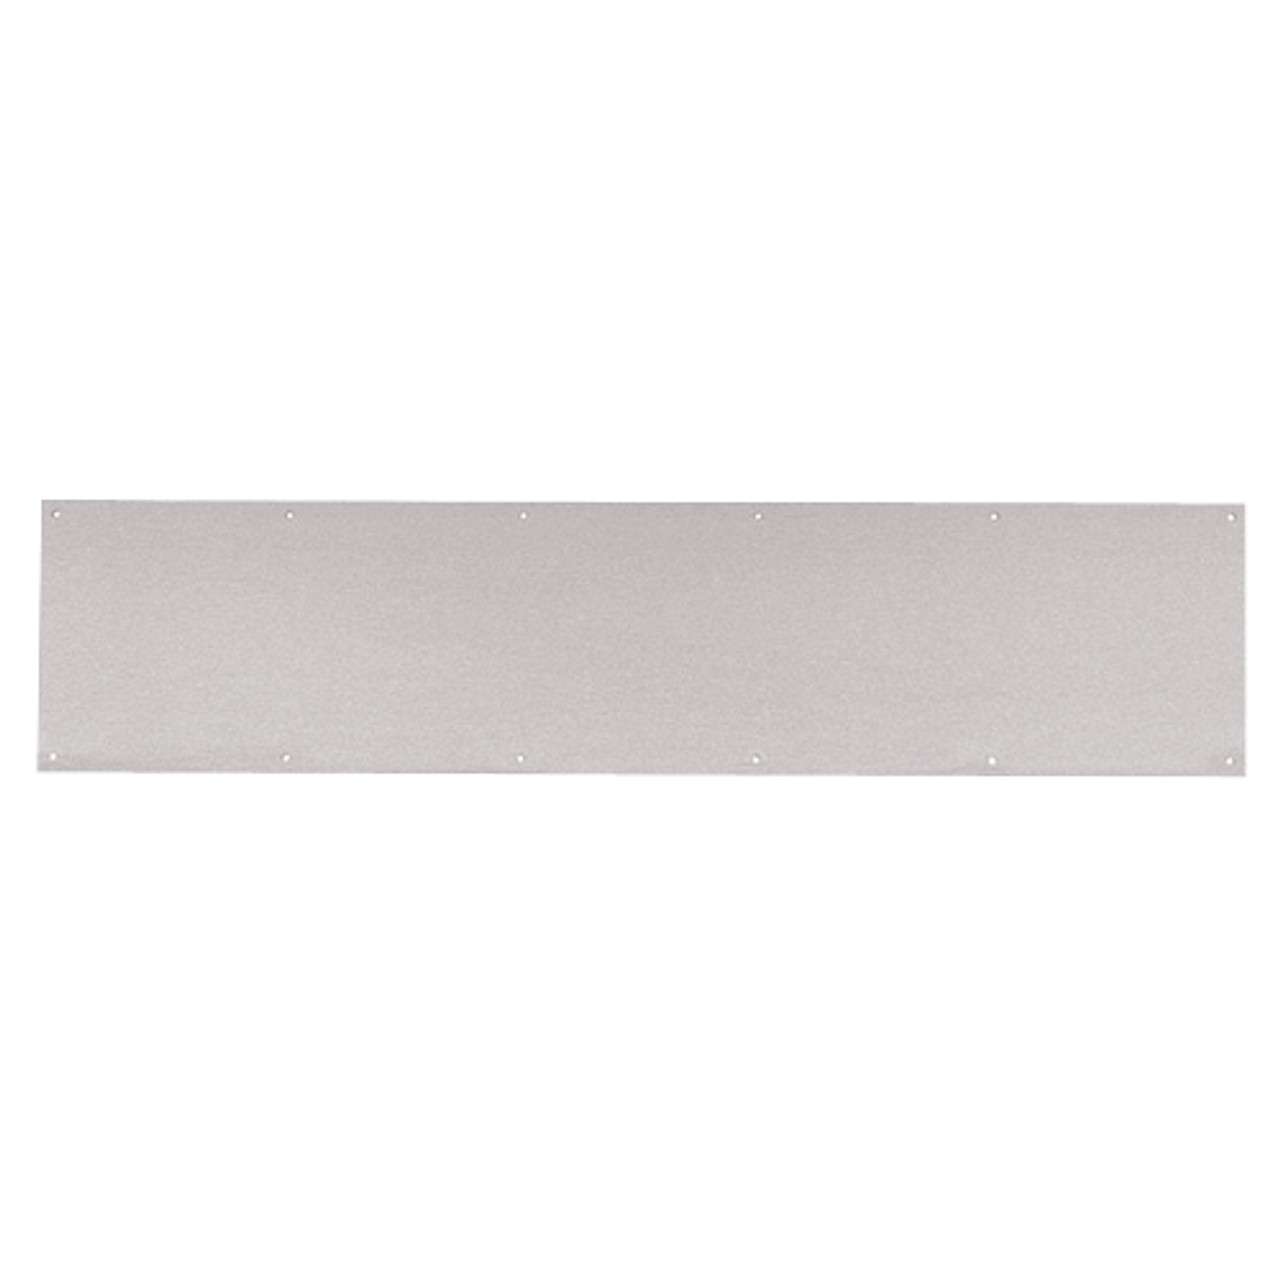 8400-US32D-32x34-B-CS Ives 8400 Series Protection Plate in Satin Stainless Steel